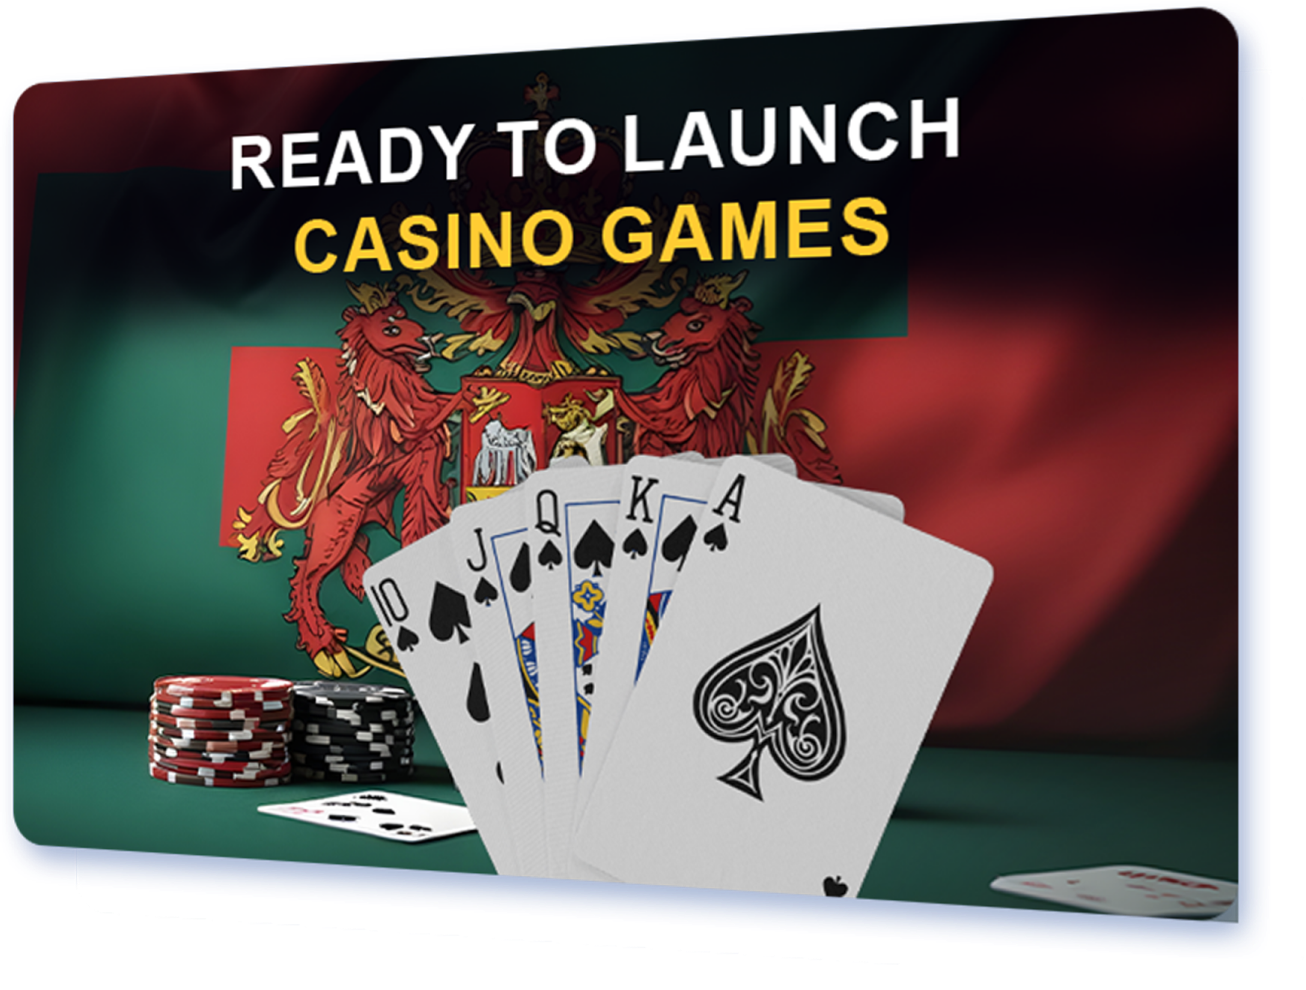 Ready to Launch Casino Games